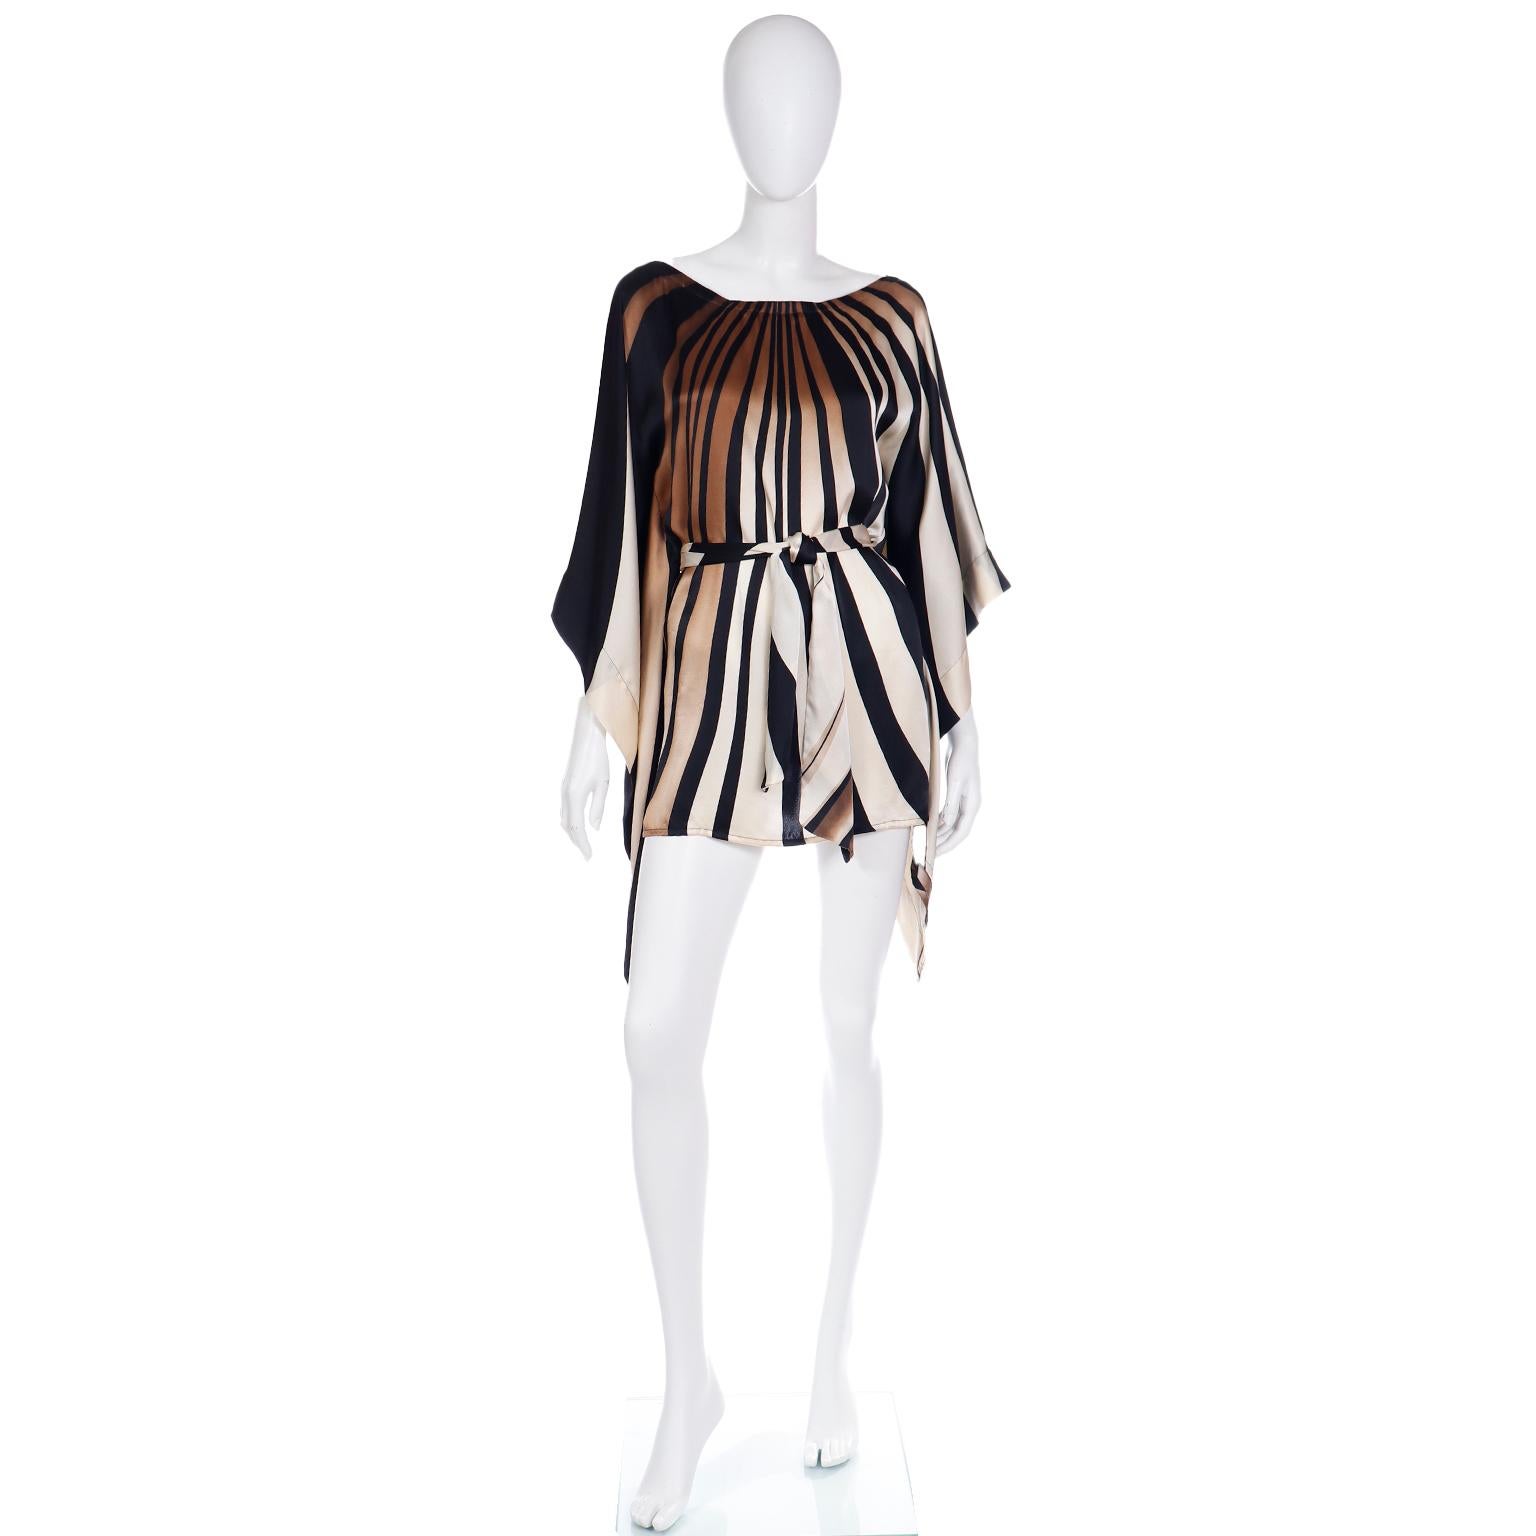 We love this fabulous silk striped caftan style top! This incredible vintage piece is in opaque shades of brown, black and ivory with abstract stripes and a beautiful silhouette! The sleeves are a variation on angle sleeves and the wide, boat neck